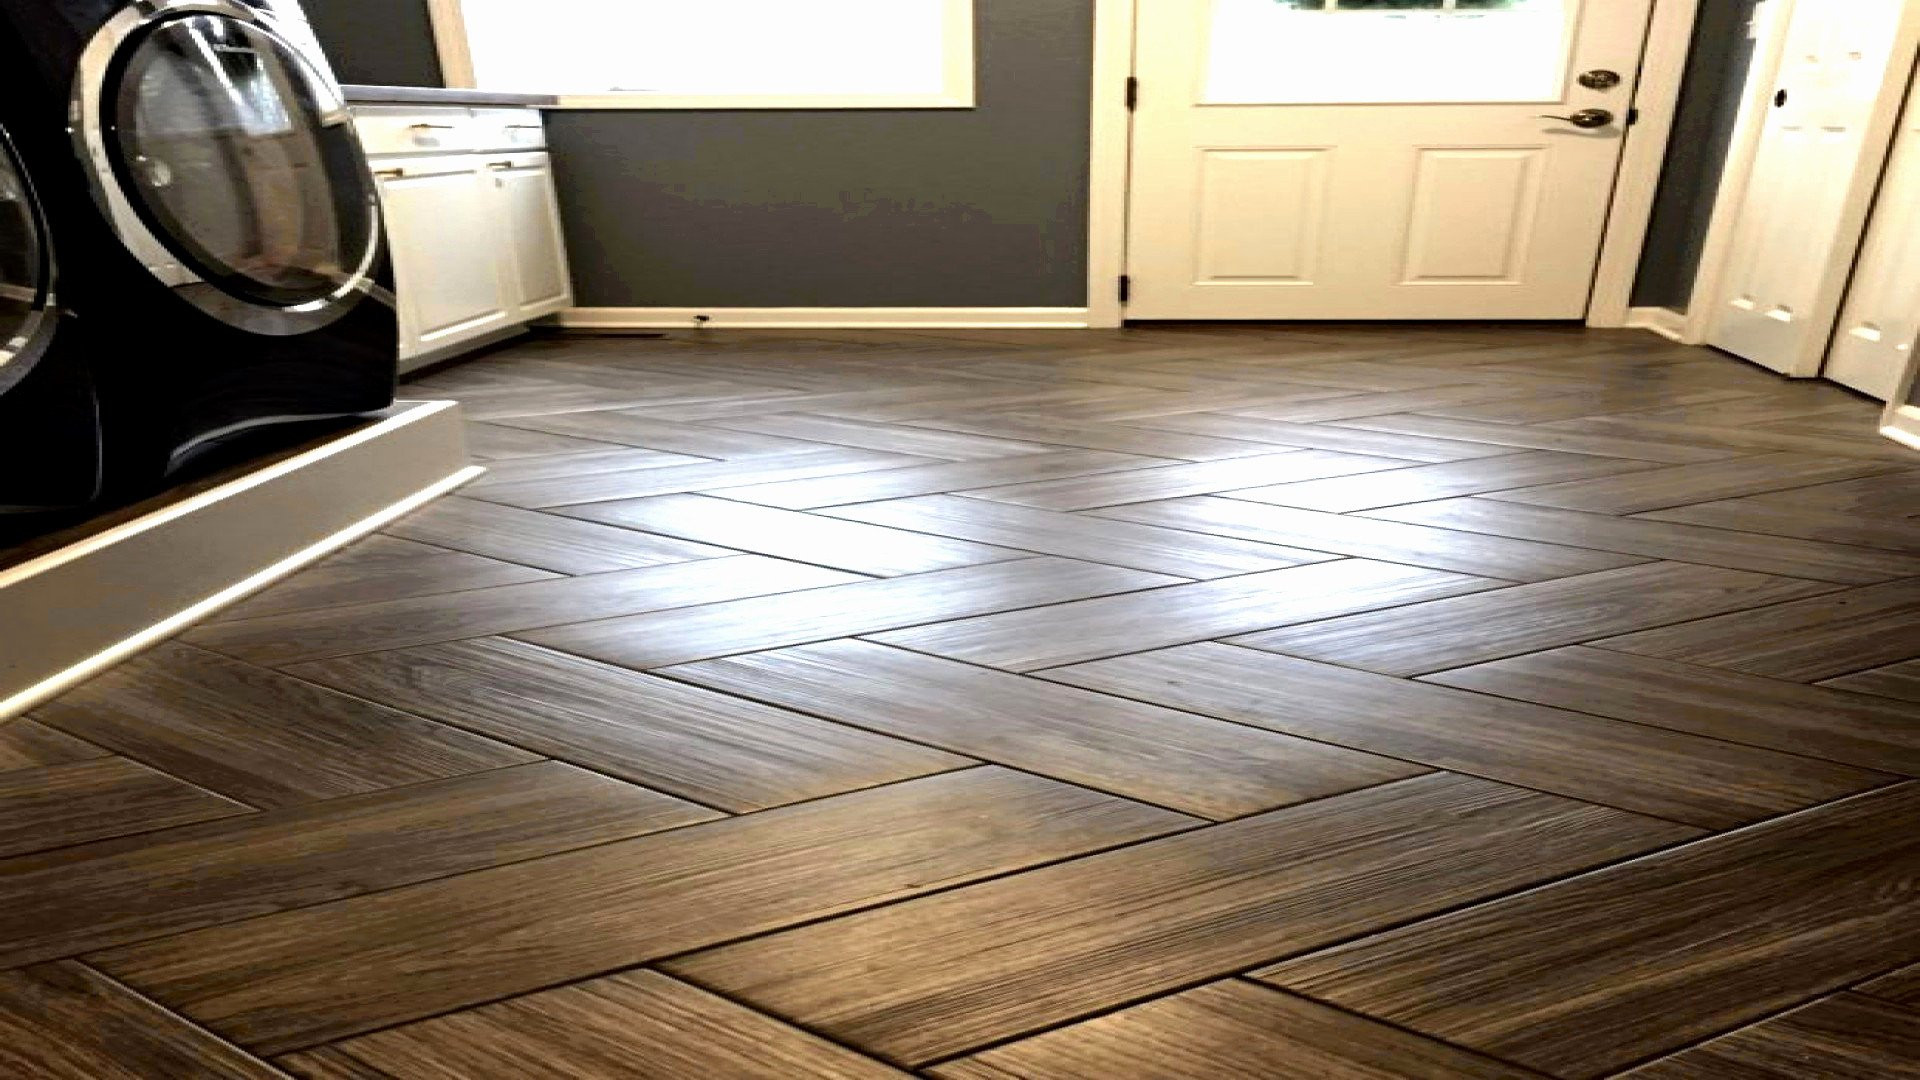 25 Great Hardwood Floor Trends 2018 2024 free download hardwood floor trends 2018 of download 30 lovely ceramic tile wood plank missing person search com throughout ceramic tile wood plank best of wood plank tile flooring of ceramic tile wood pl